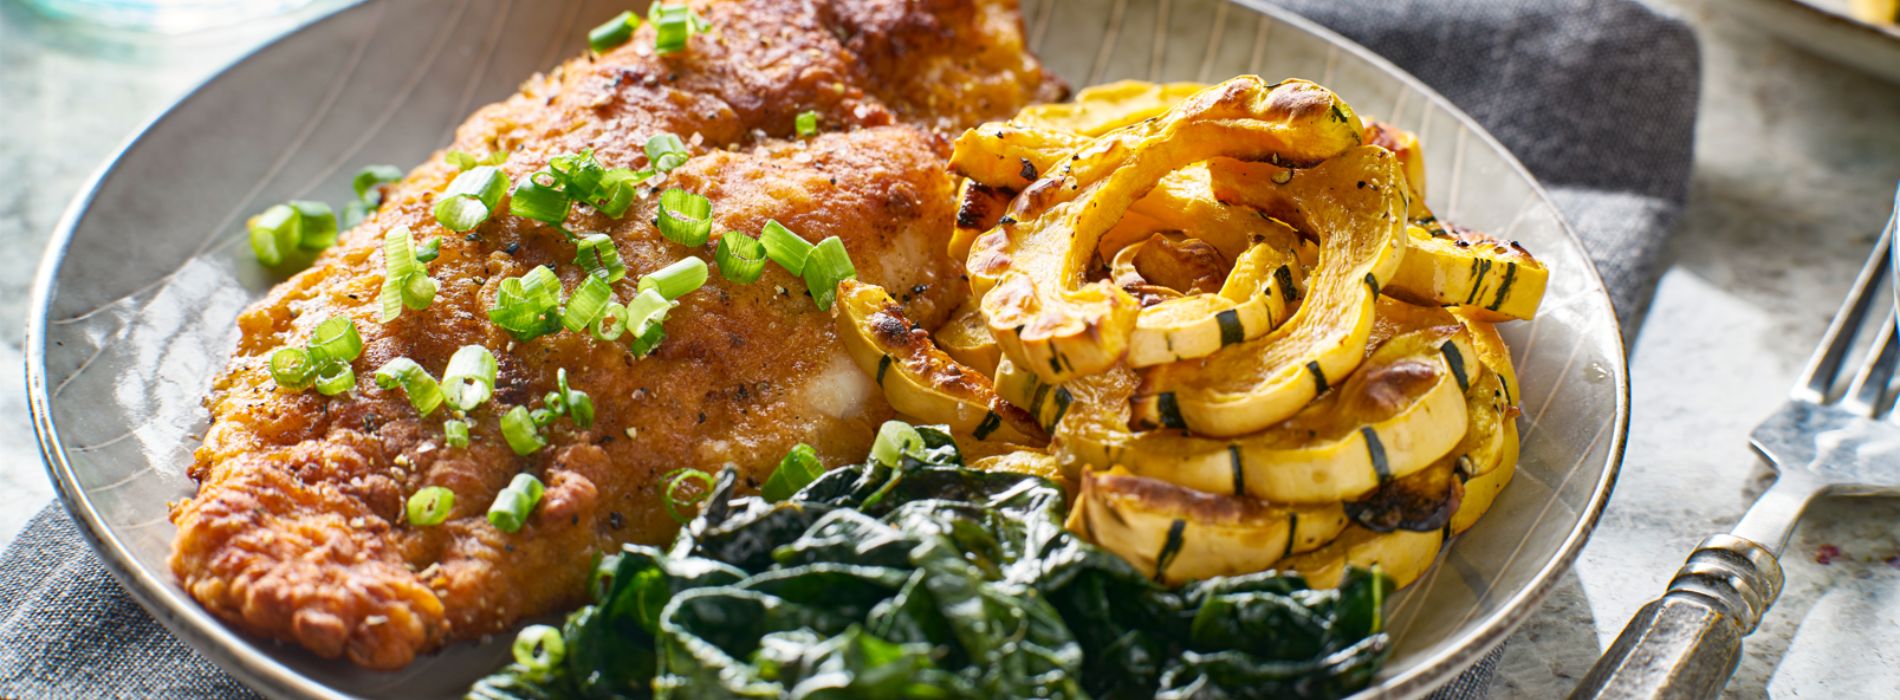 pan-fried-catfish-with-spinach-and-squash